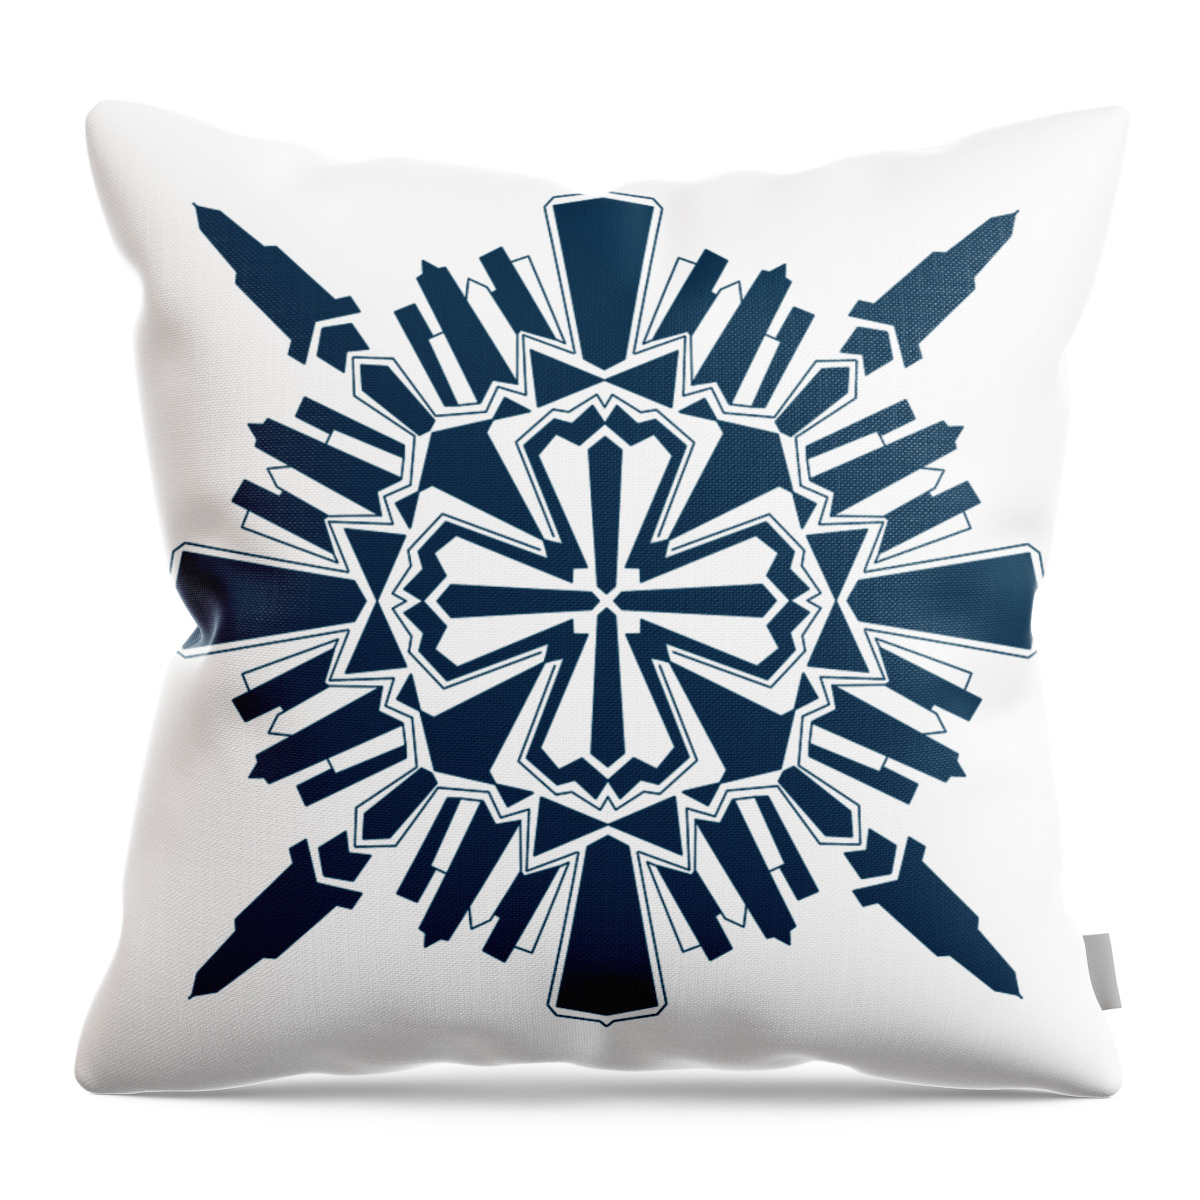 City Throw Pillow featuring the digital art City Intersection by Angie Tirado